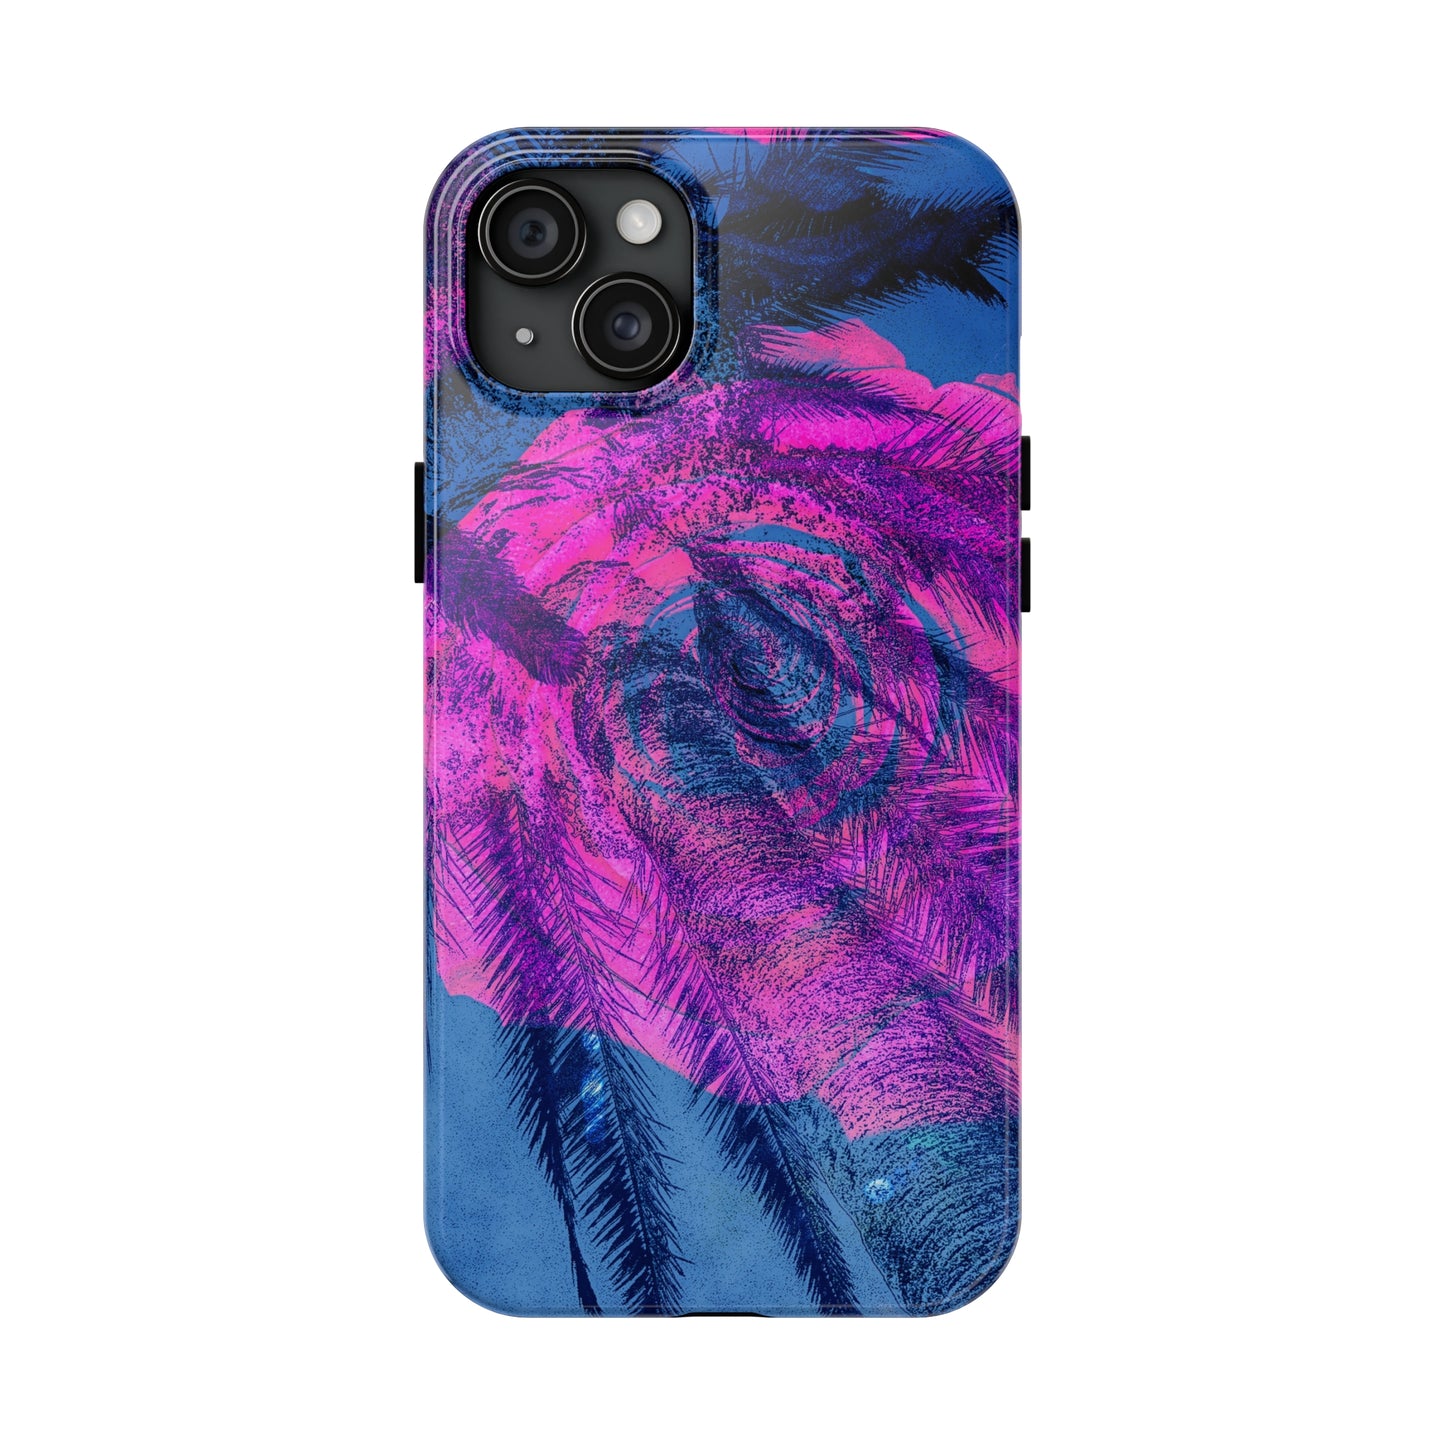 pinkgoeswithblue Tough Phone Cases